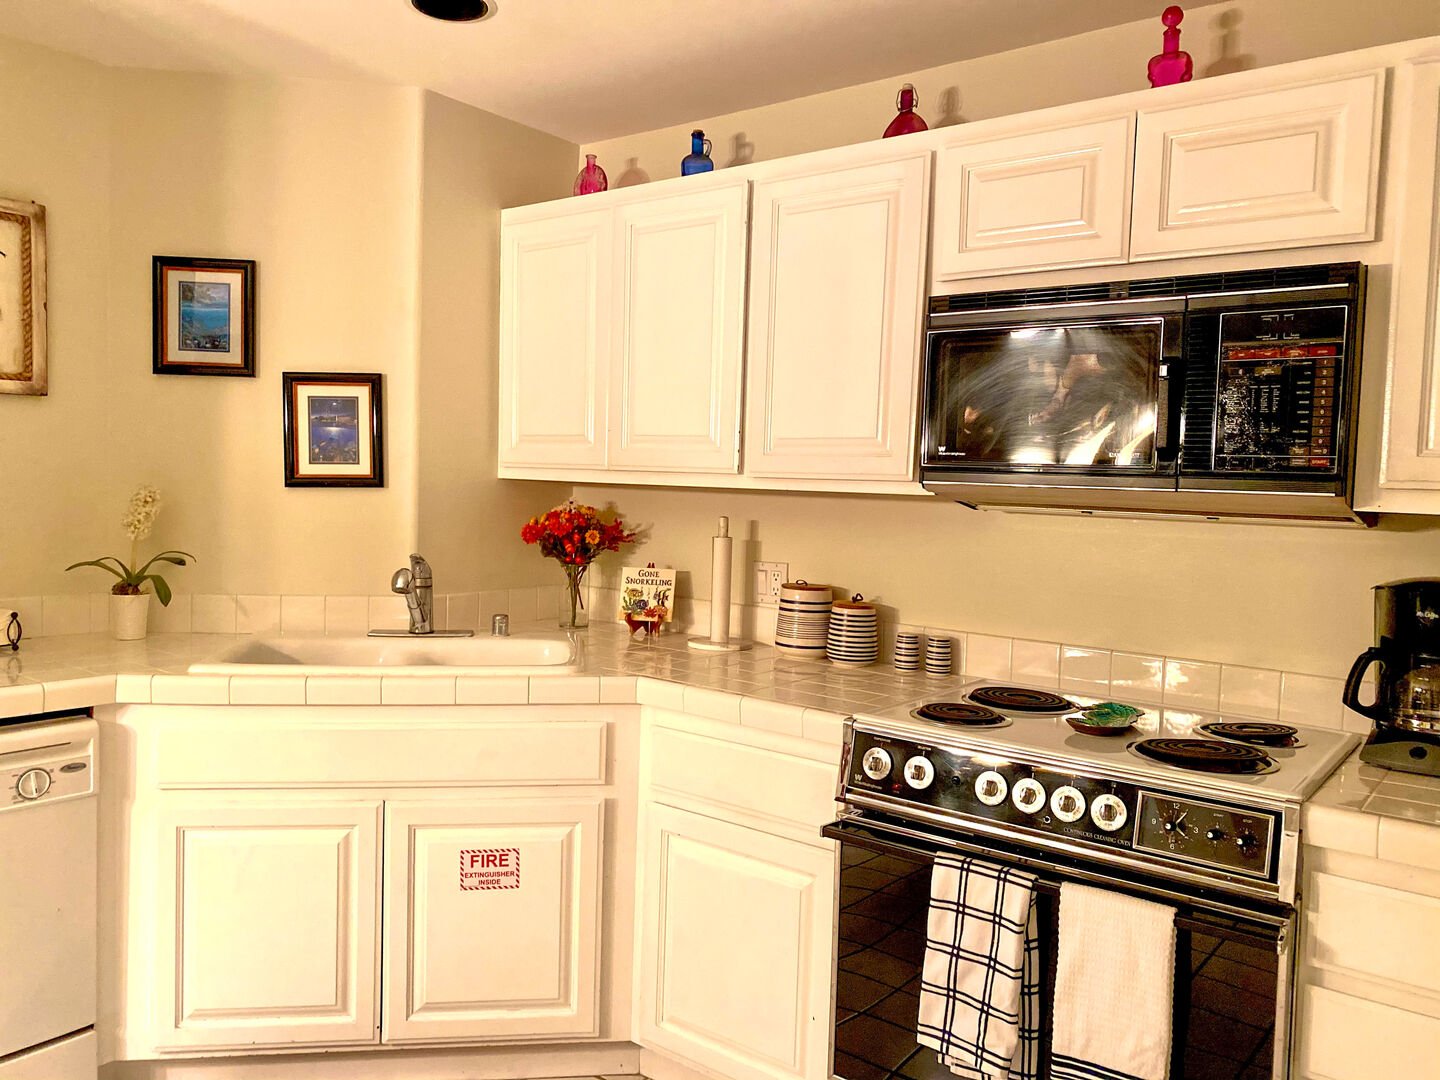 Kitchen with oven, sink, microwave, dishwasher, coffee maker, and refrigerator